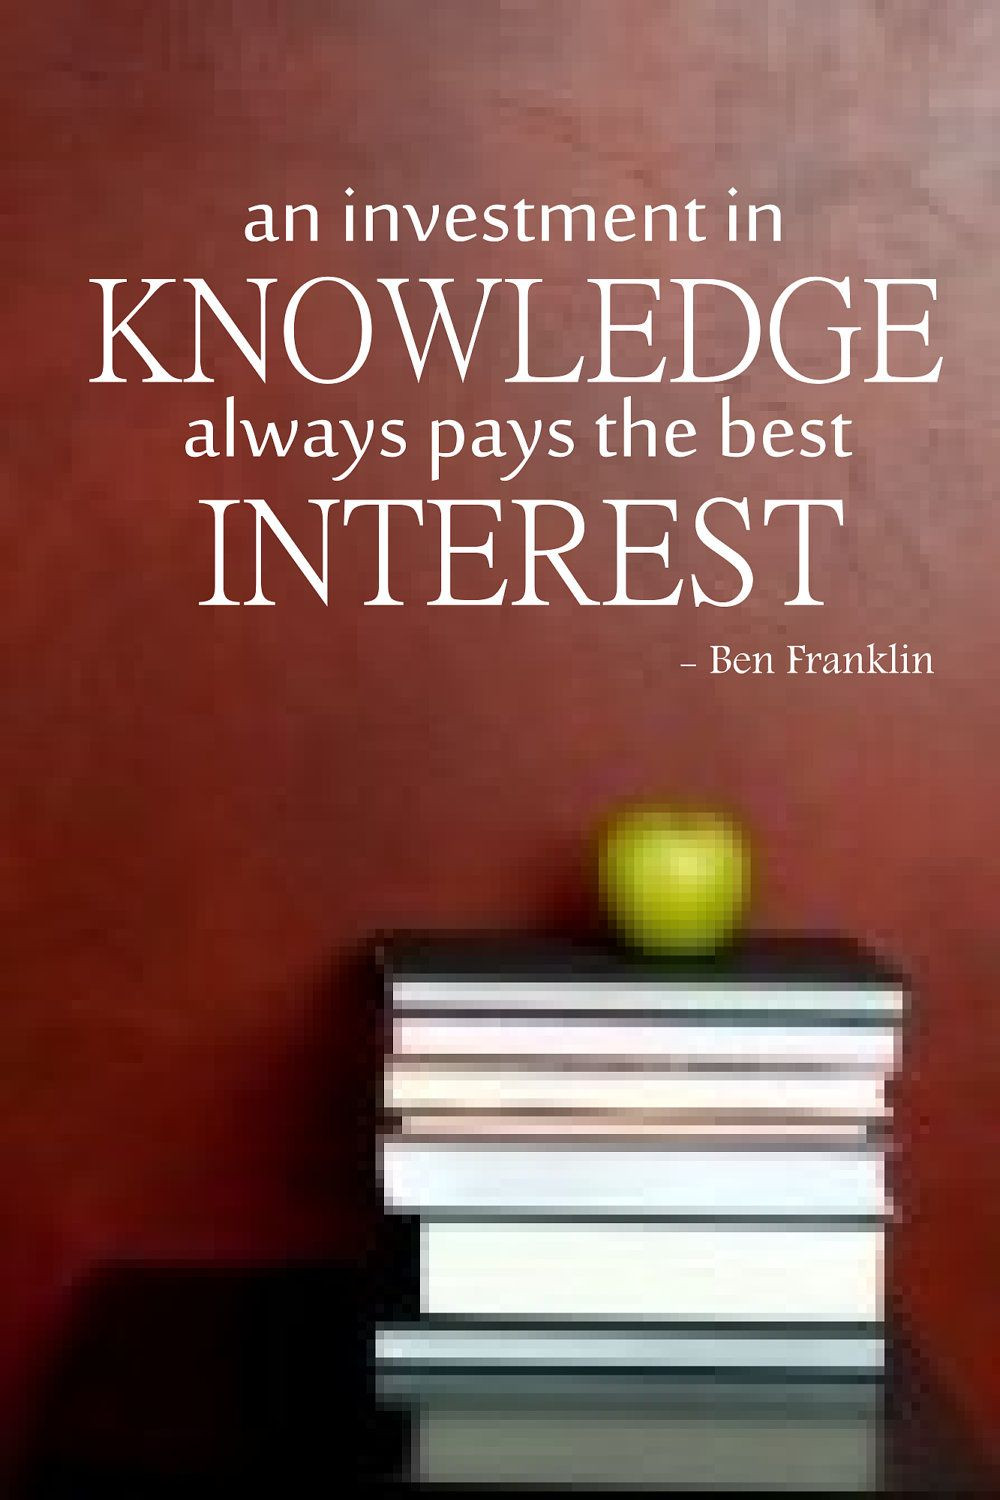 Quotes About Knowledge And Education
 Quotes About Knowledge And Education QuotesGram